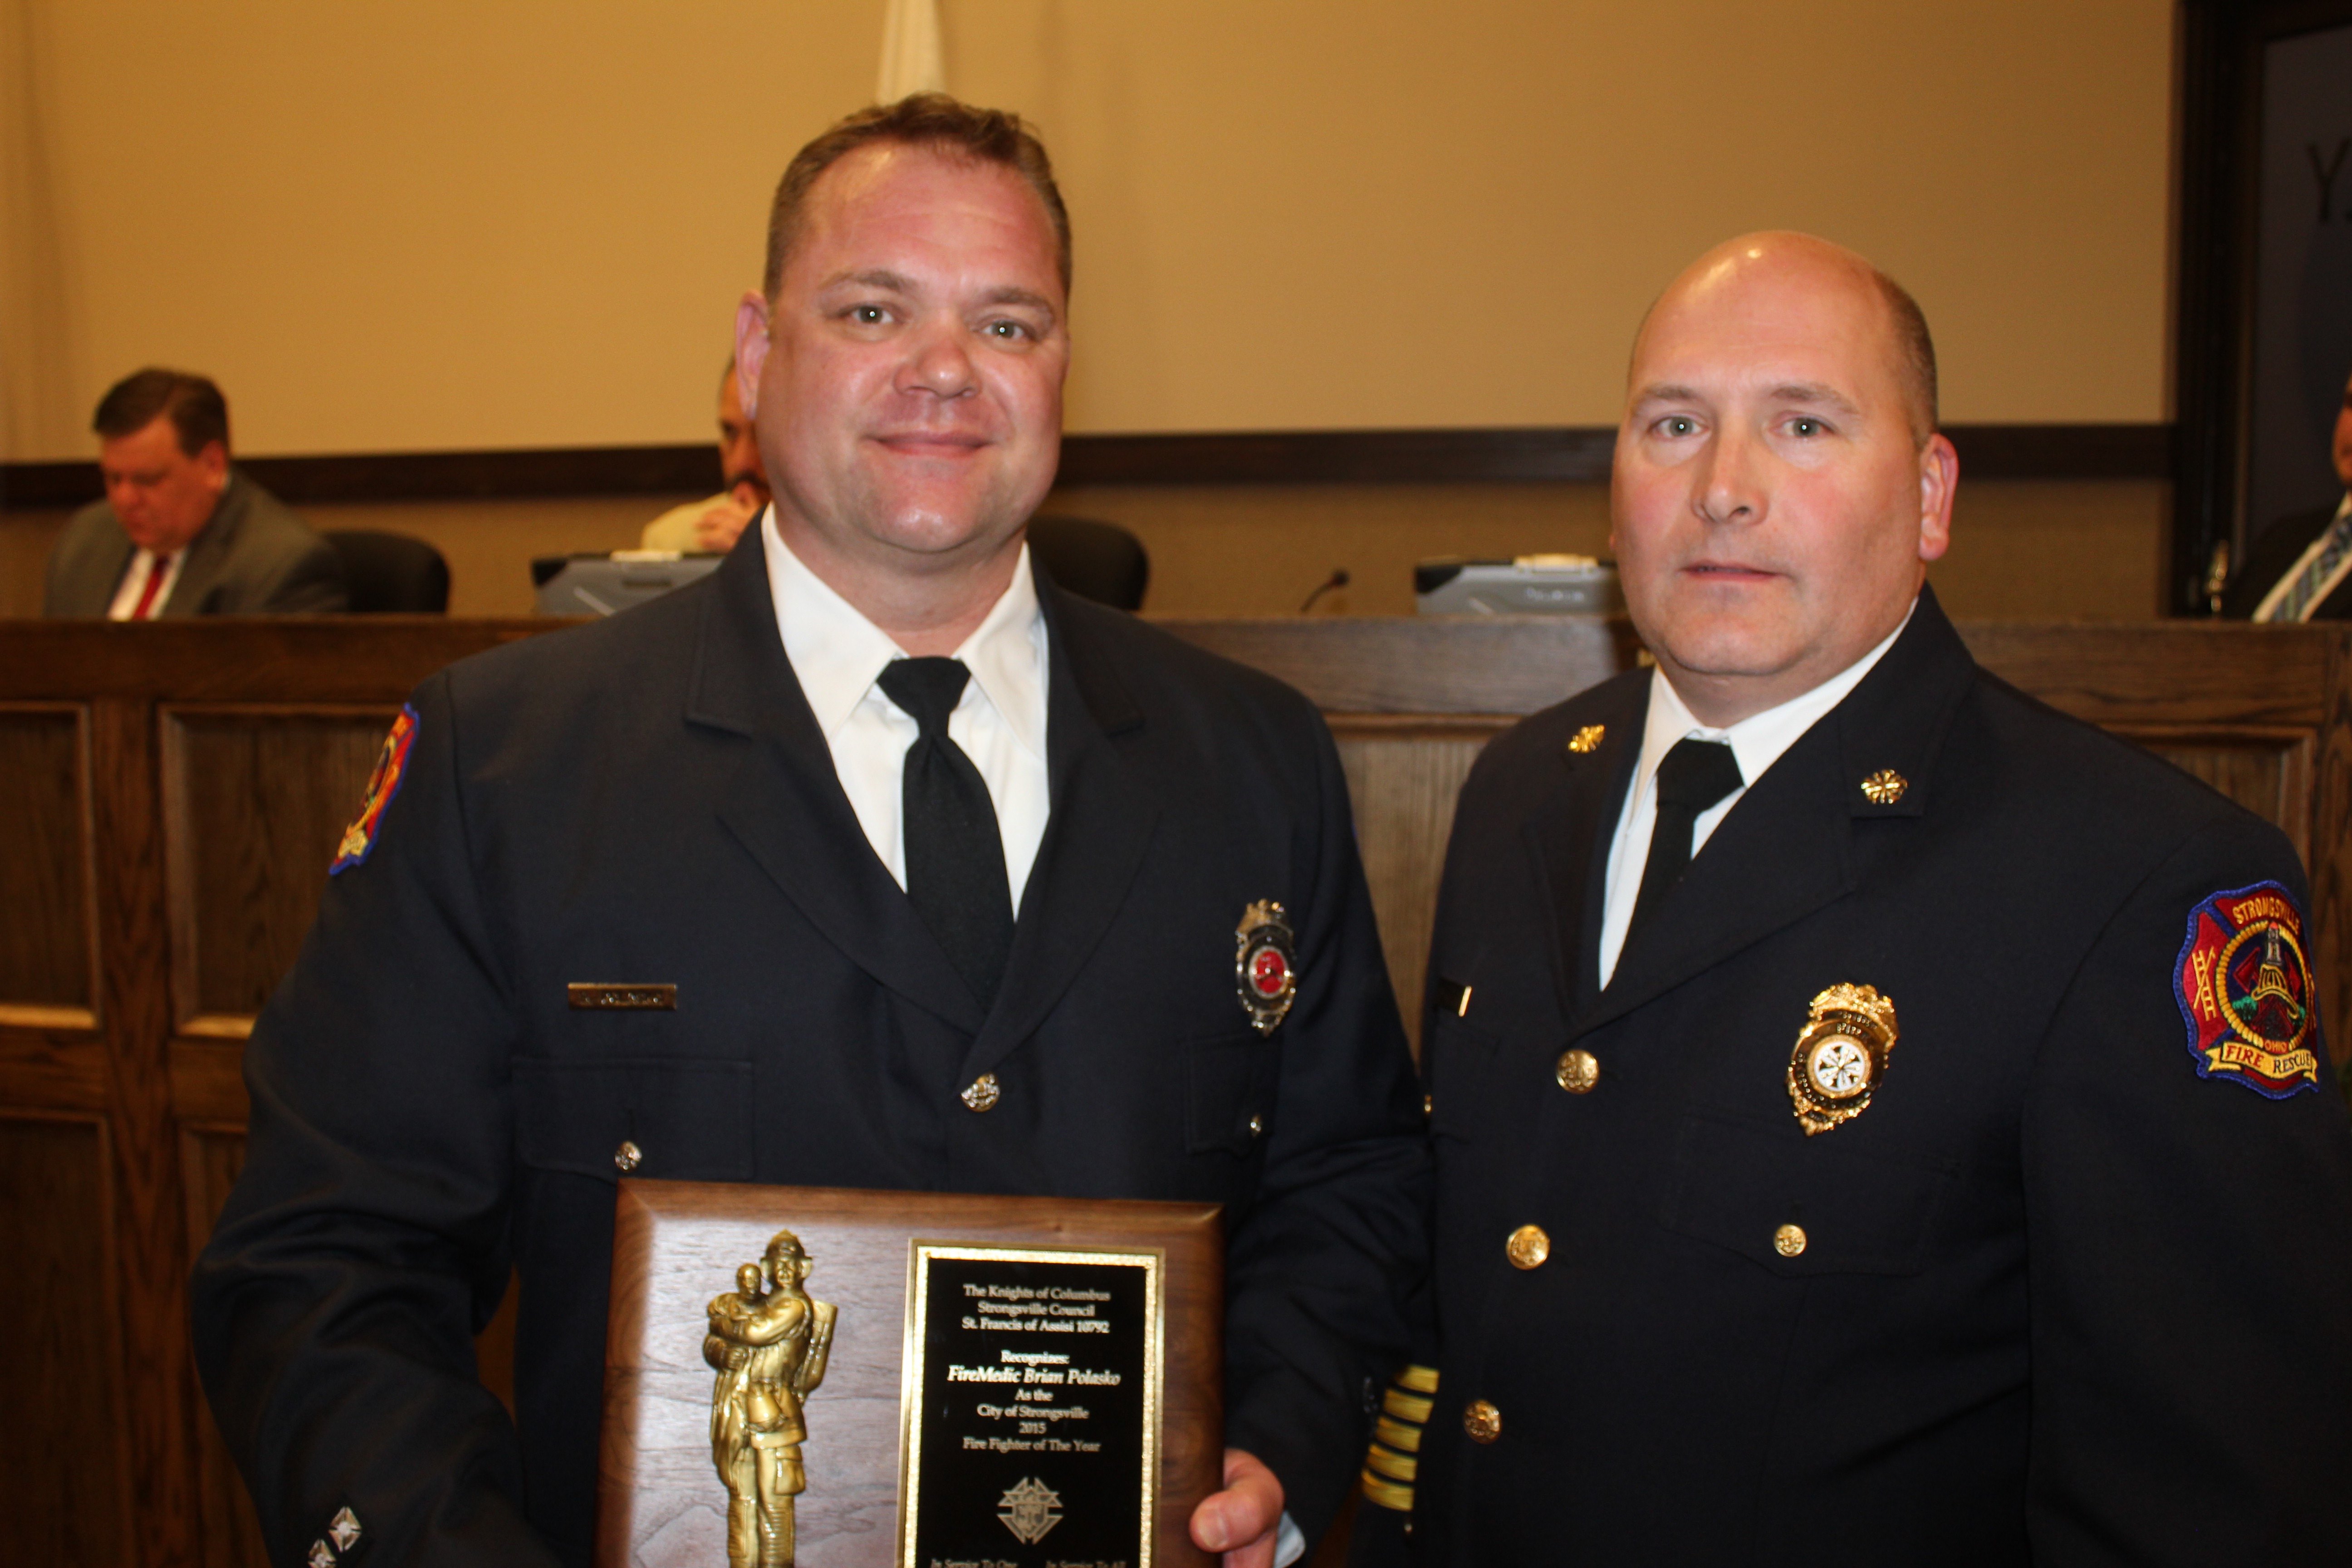 Brian Polasko is Firefighter of the Year